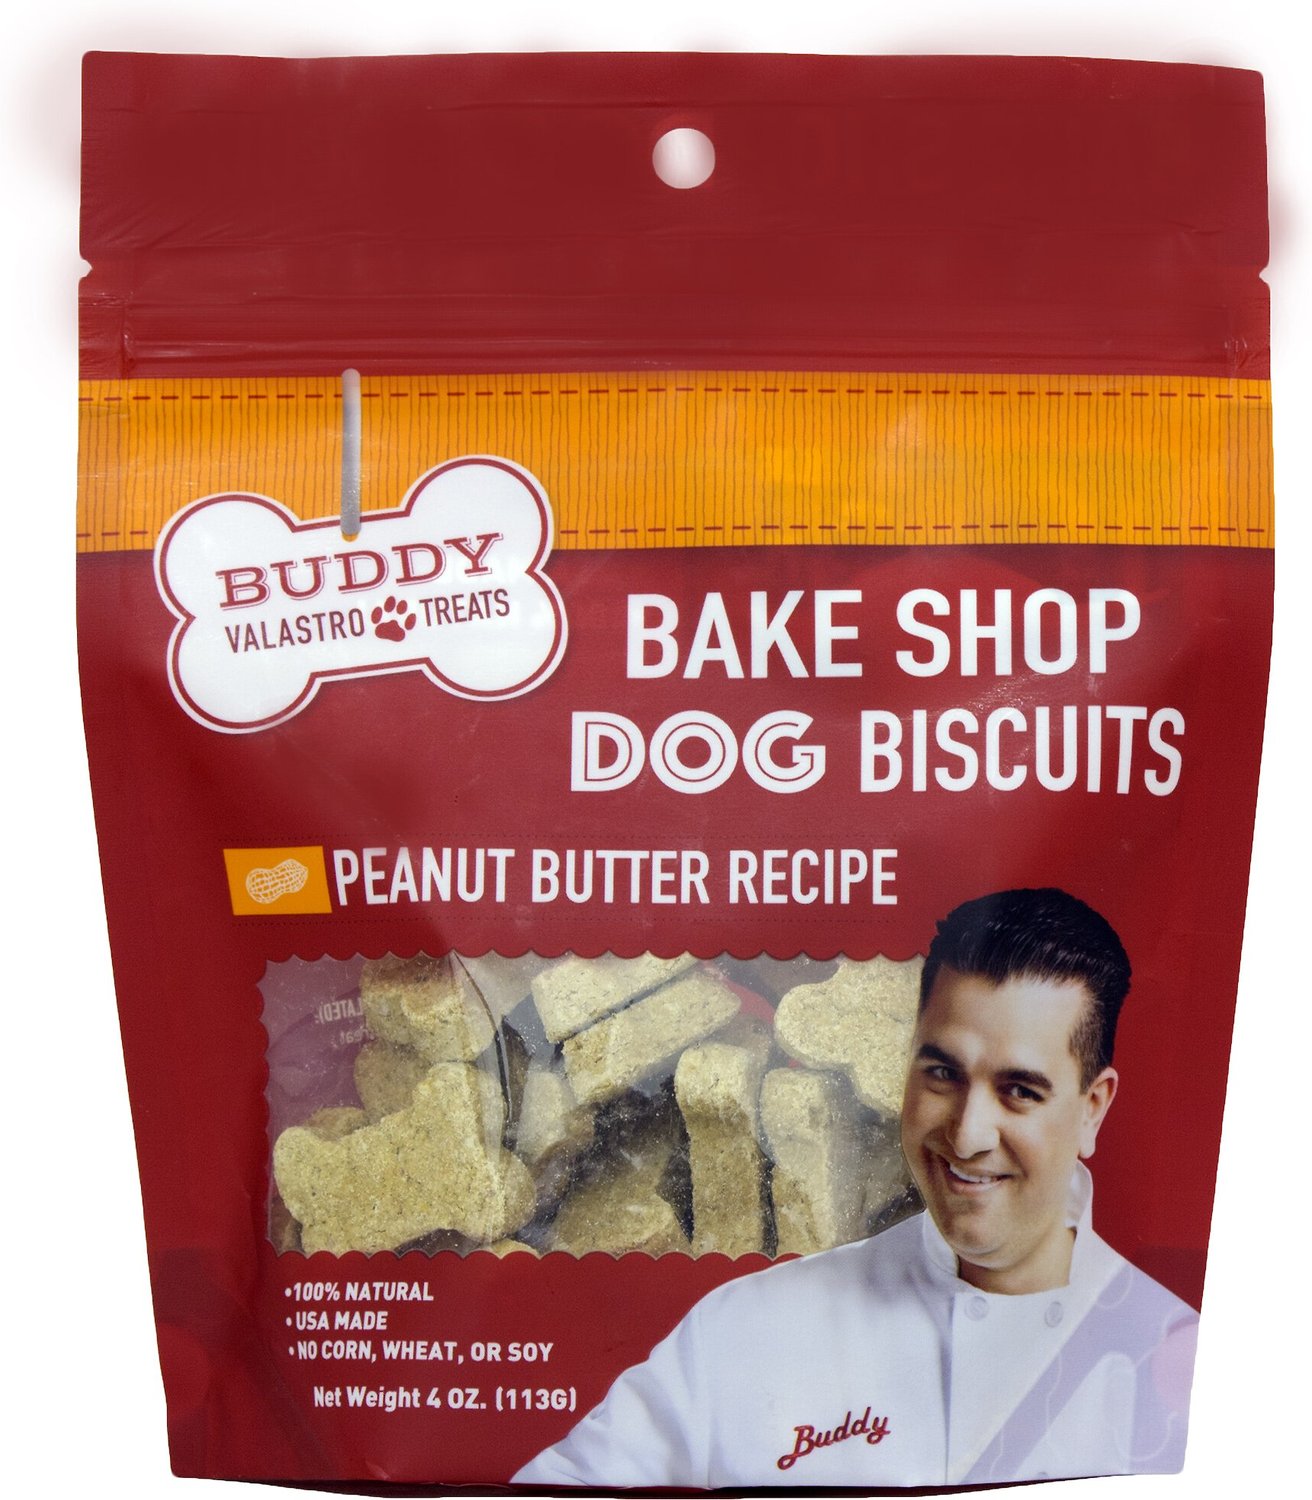 BUDDY VALASTRO PETS Bake Shop Peanut Butter Recipe Biscuits Dog Treats ...